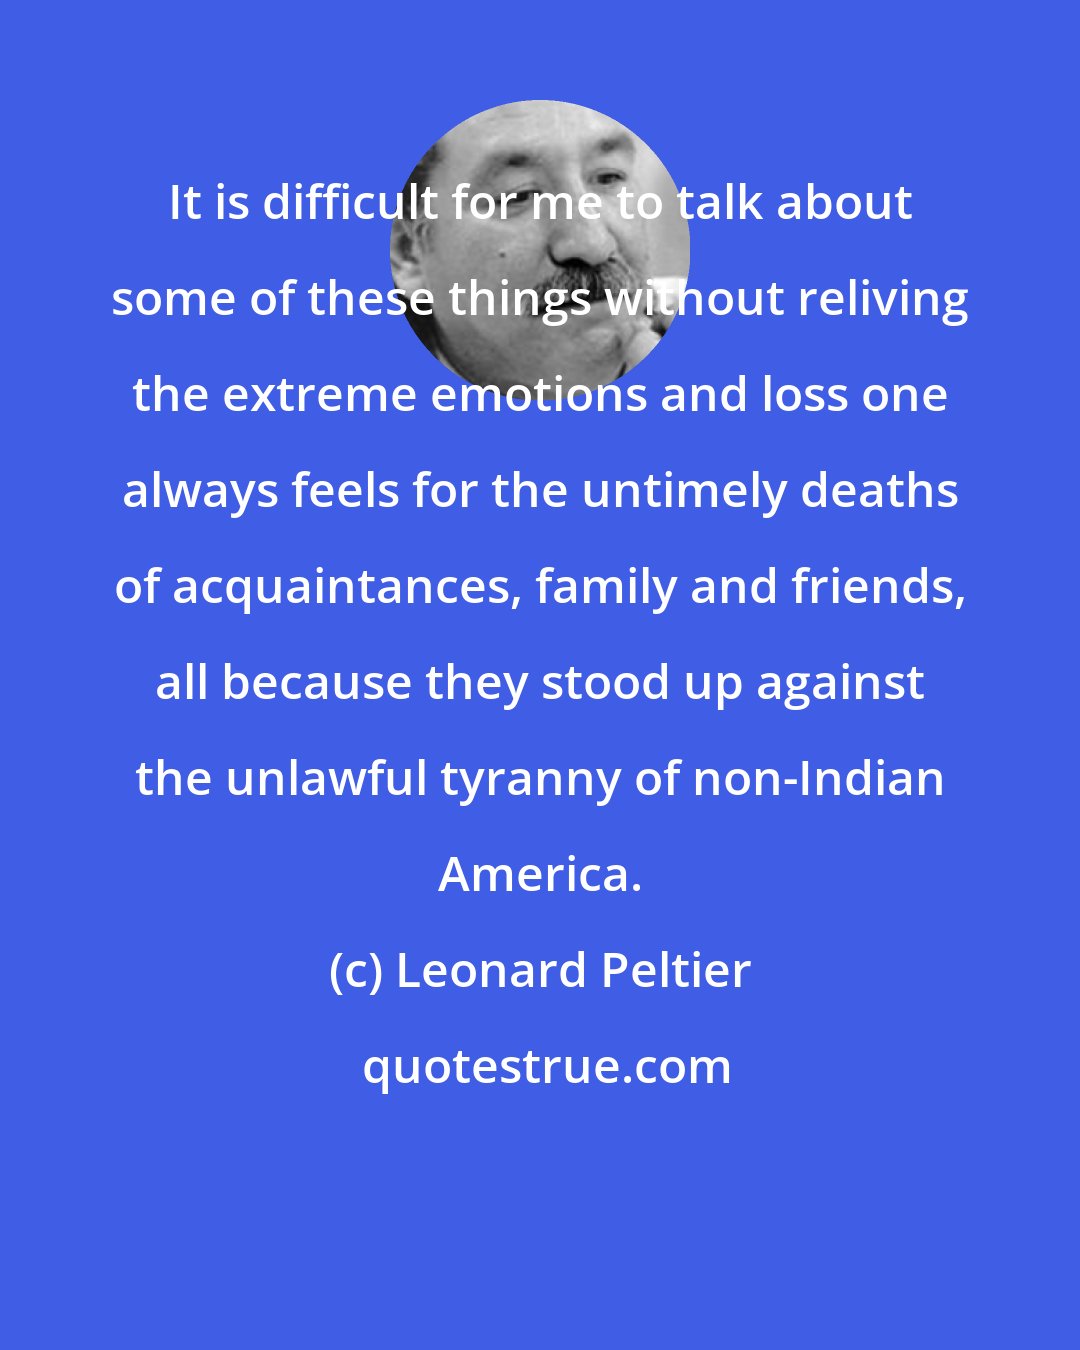 Leonard Peltier: It is difficult for me to talk about some of these things without reliving the extreme emotions and loss one always feels for the untimely deaths of acquaintances, family and friends, all because they stood up against the unlawful tyranny of non-Indian America.